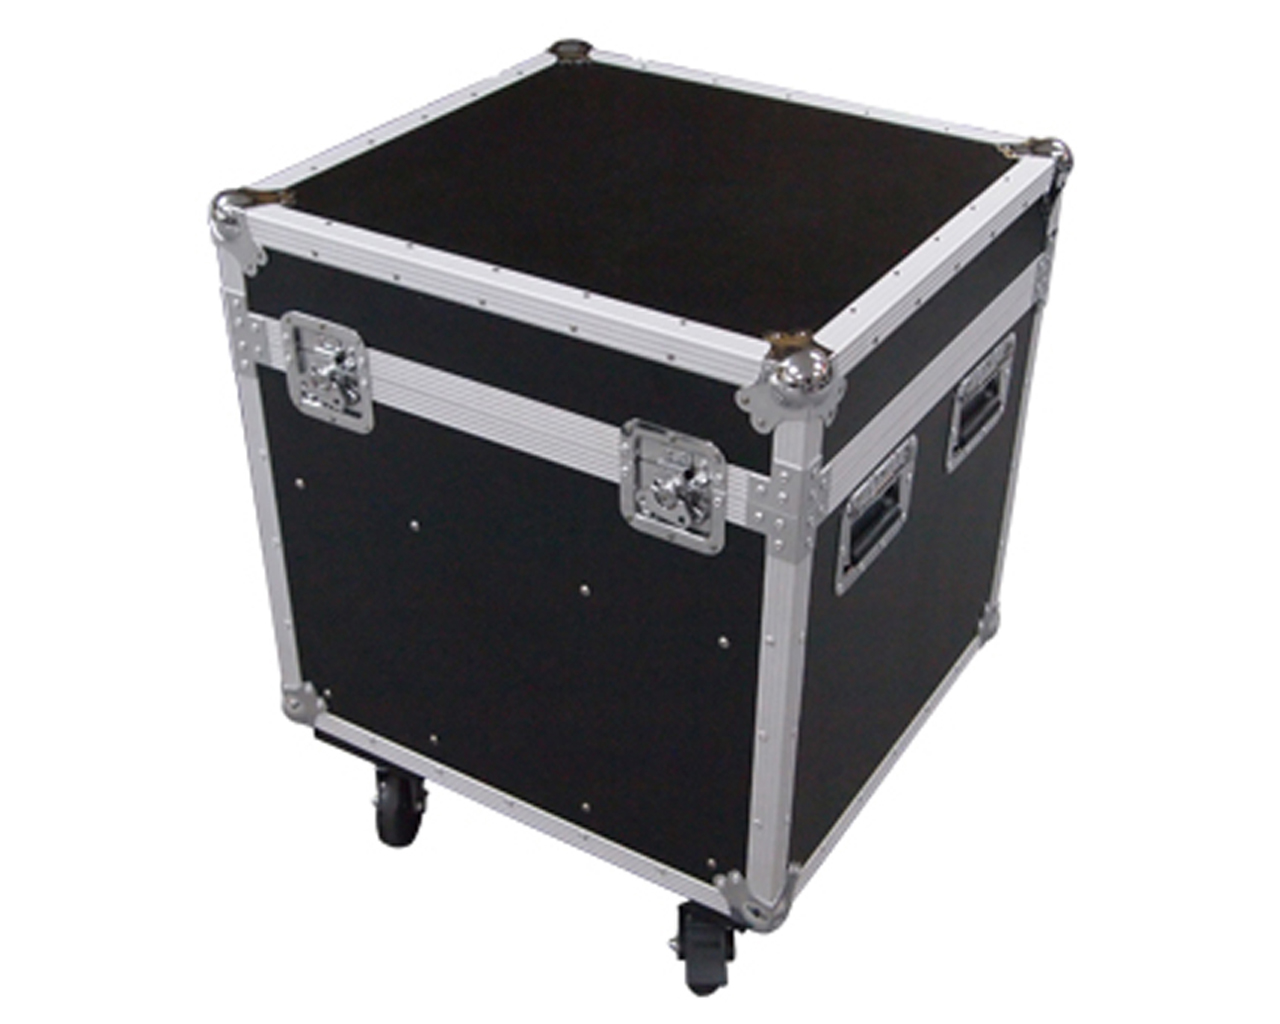 Products | Builder Professional Case Maker